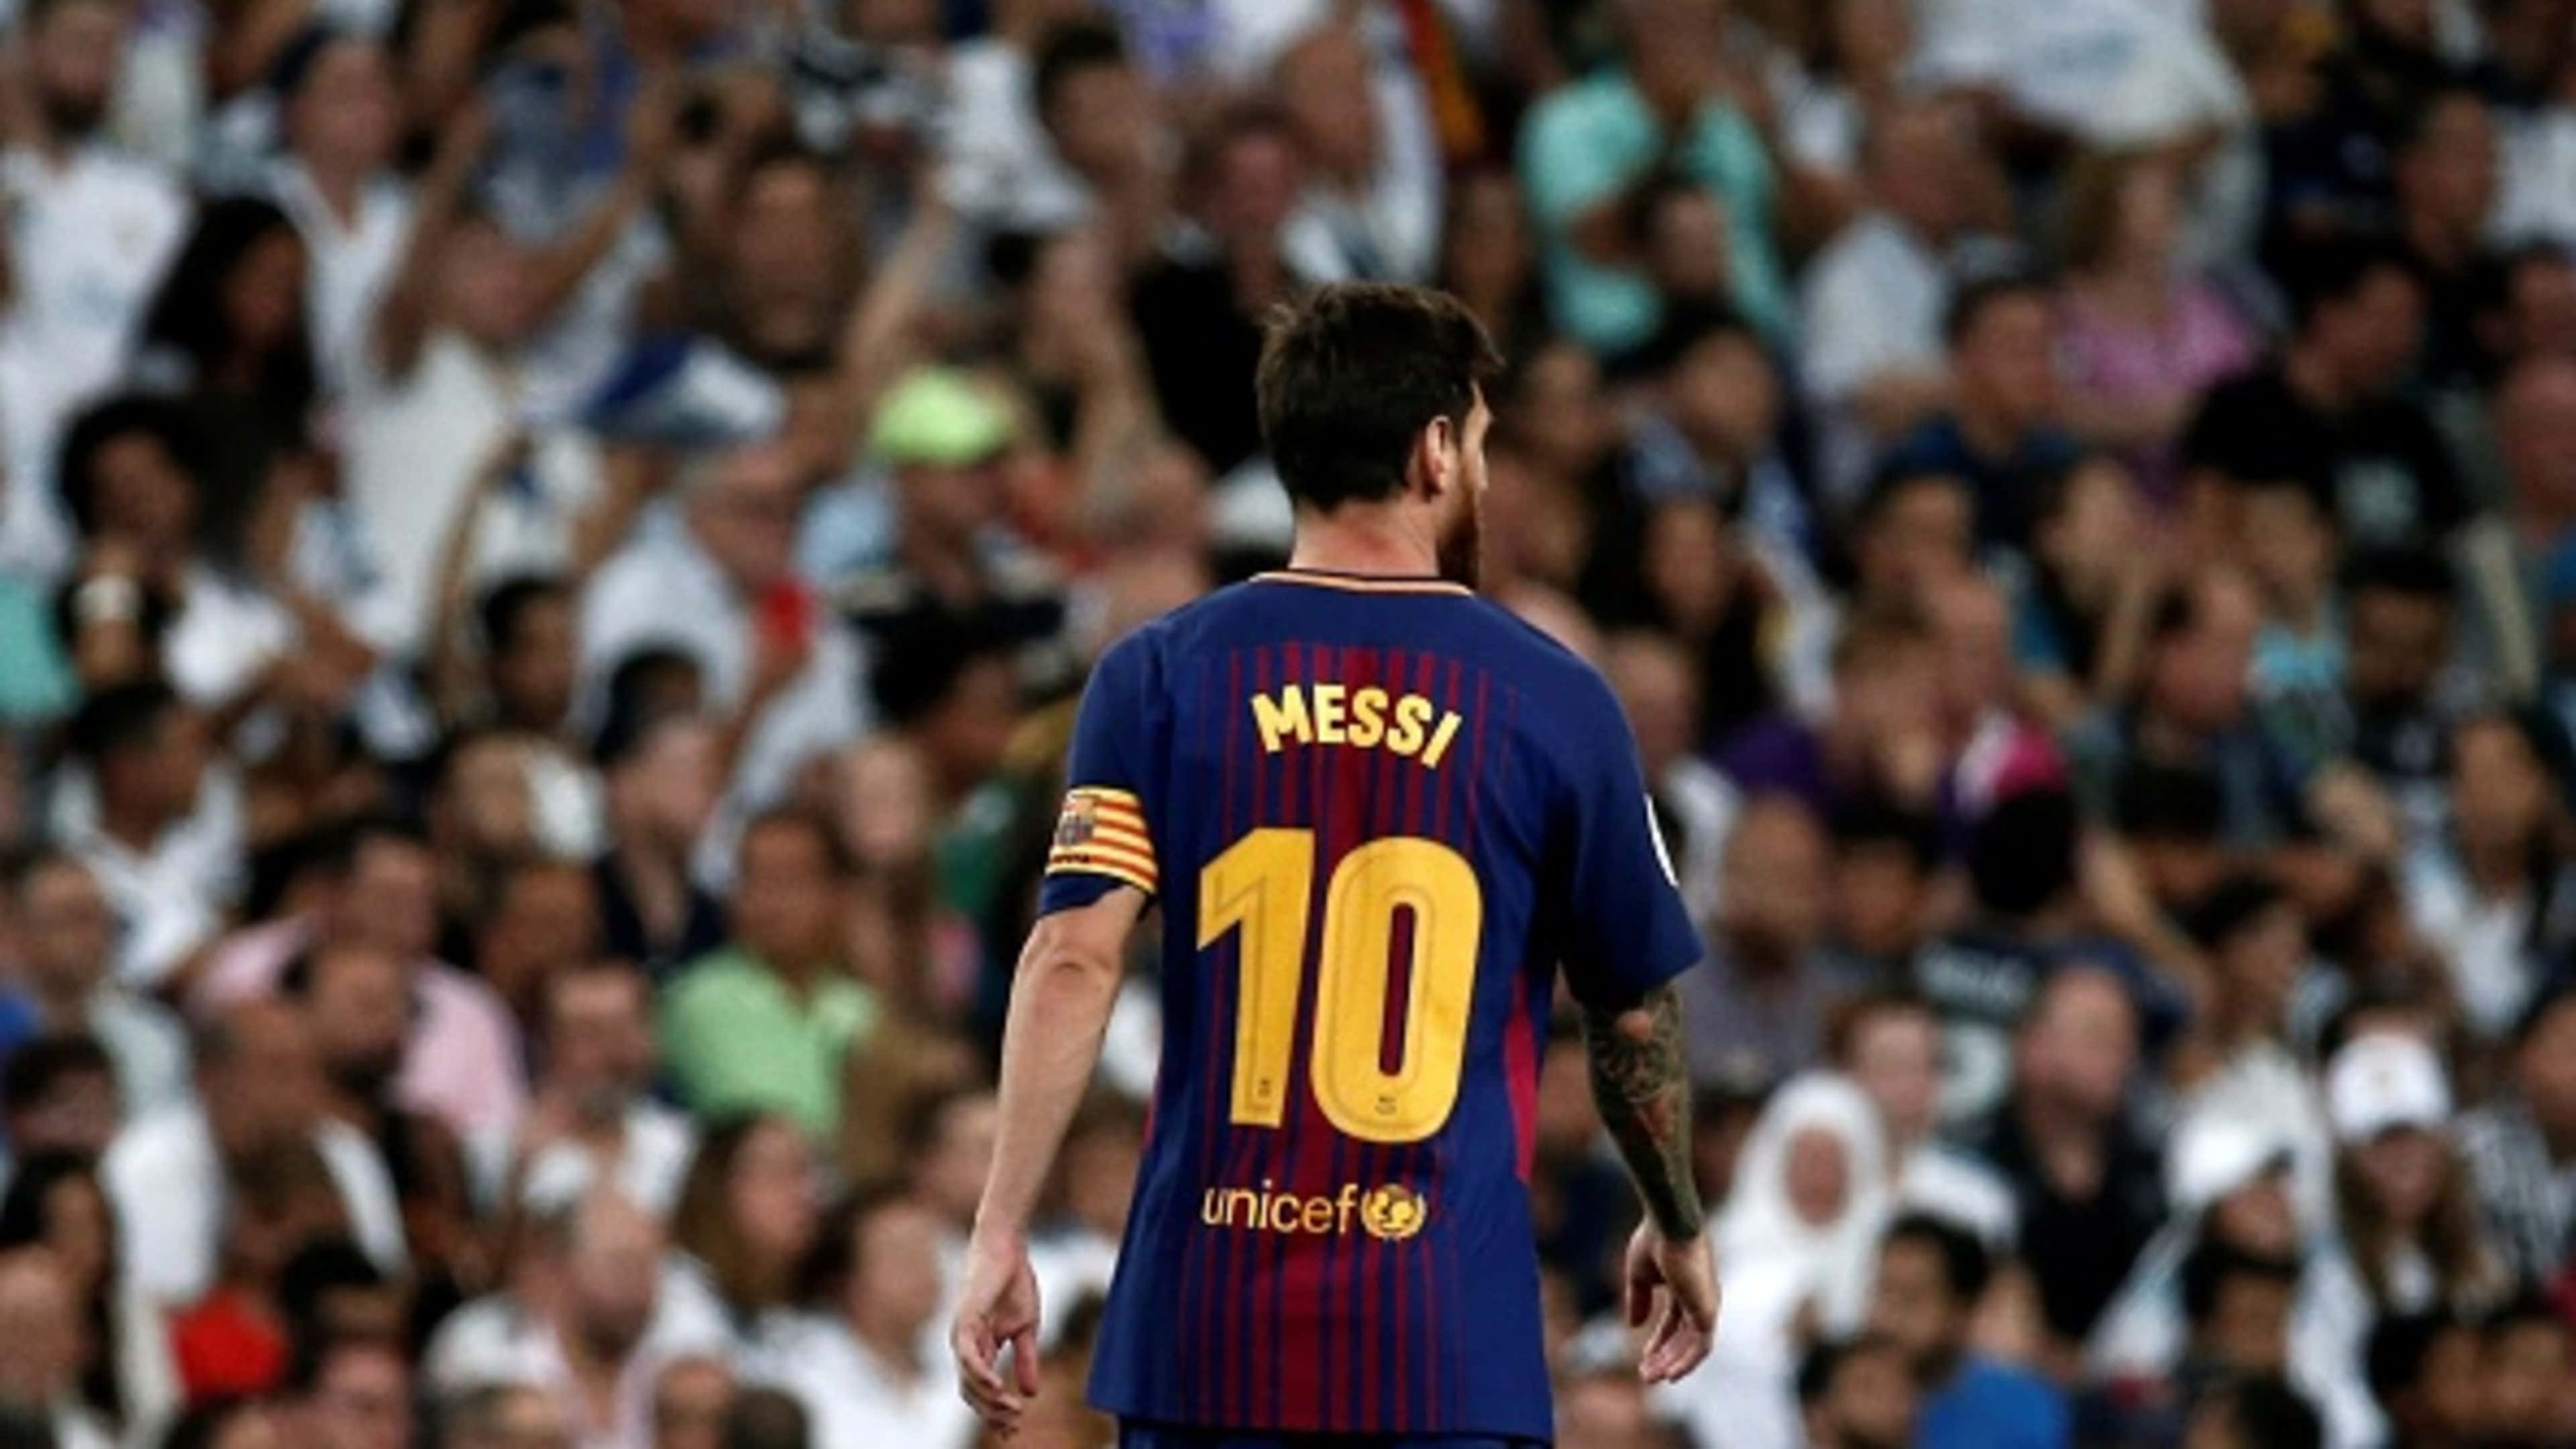 Explained: Why Barcelona cannot retire Messi's number 10 jersey - What does  the La Liga rule state?